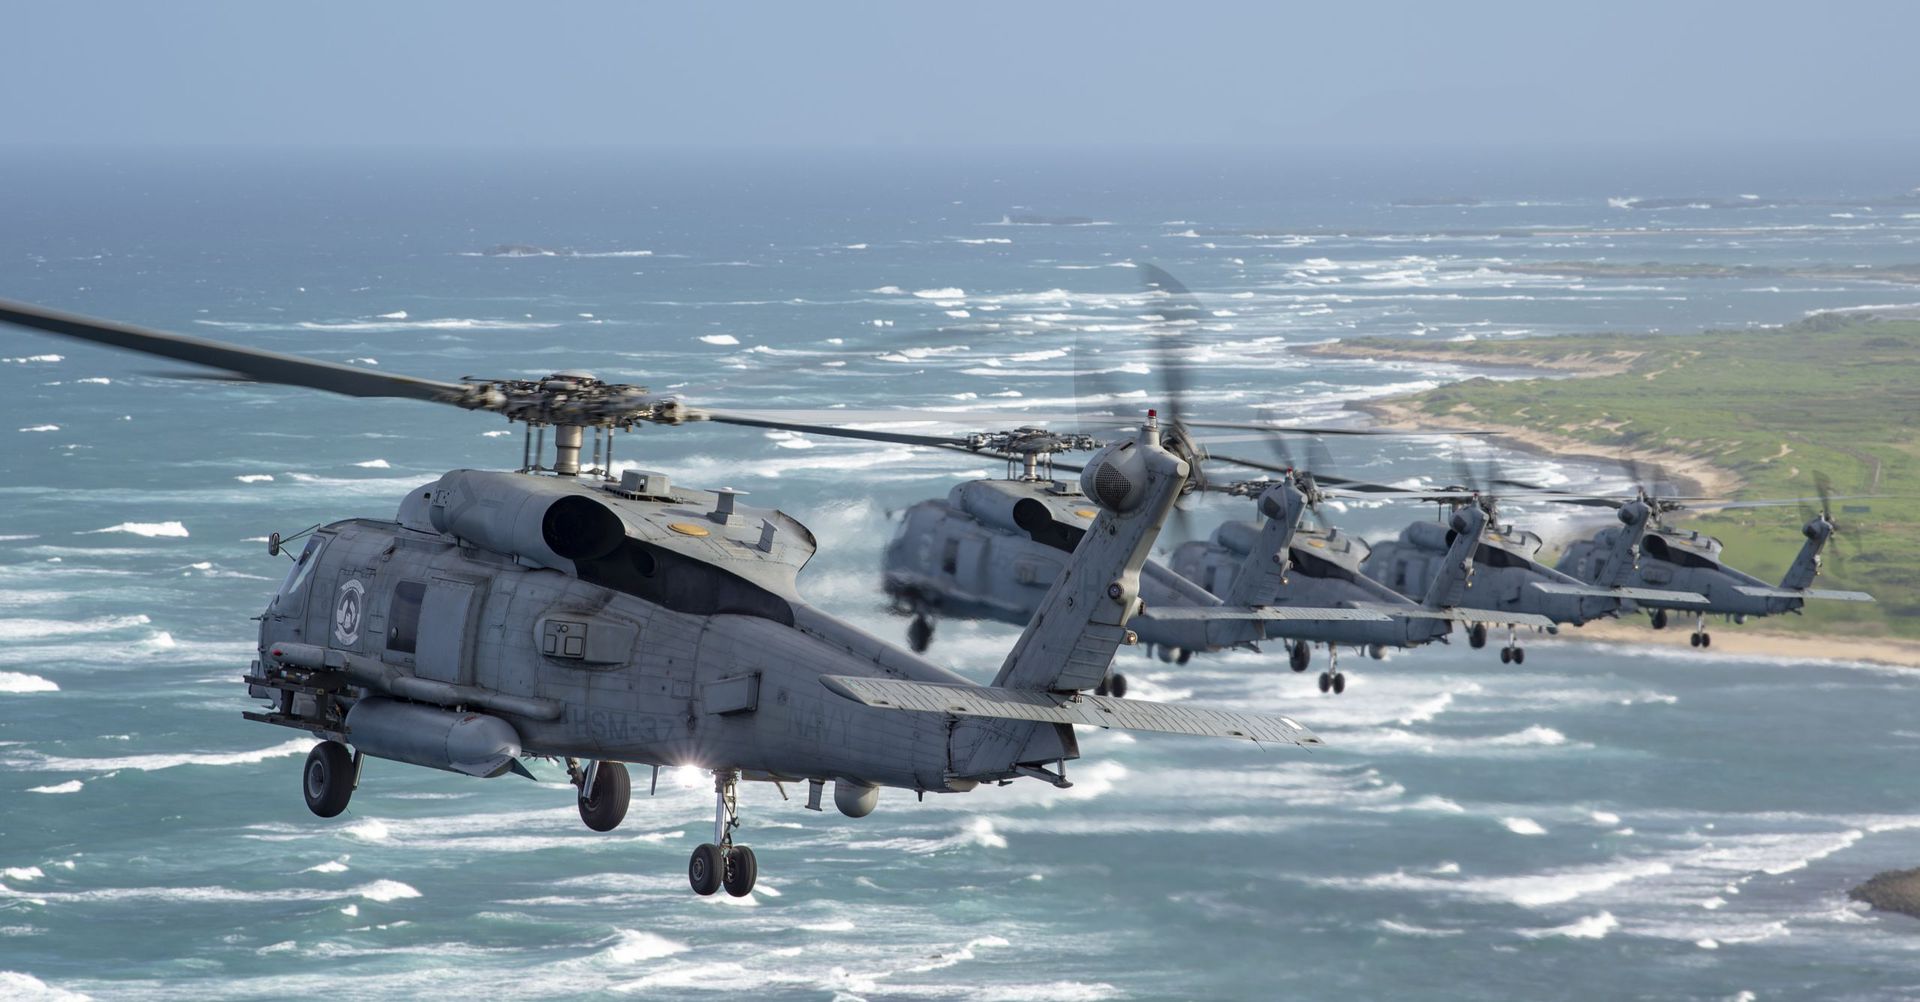 MH-60R Sea Hawk helicopters